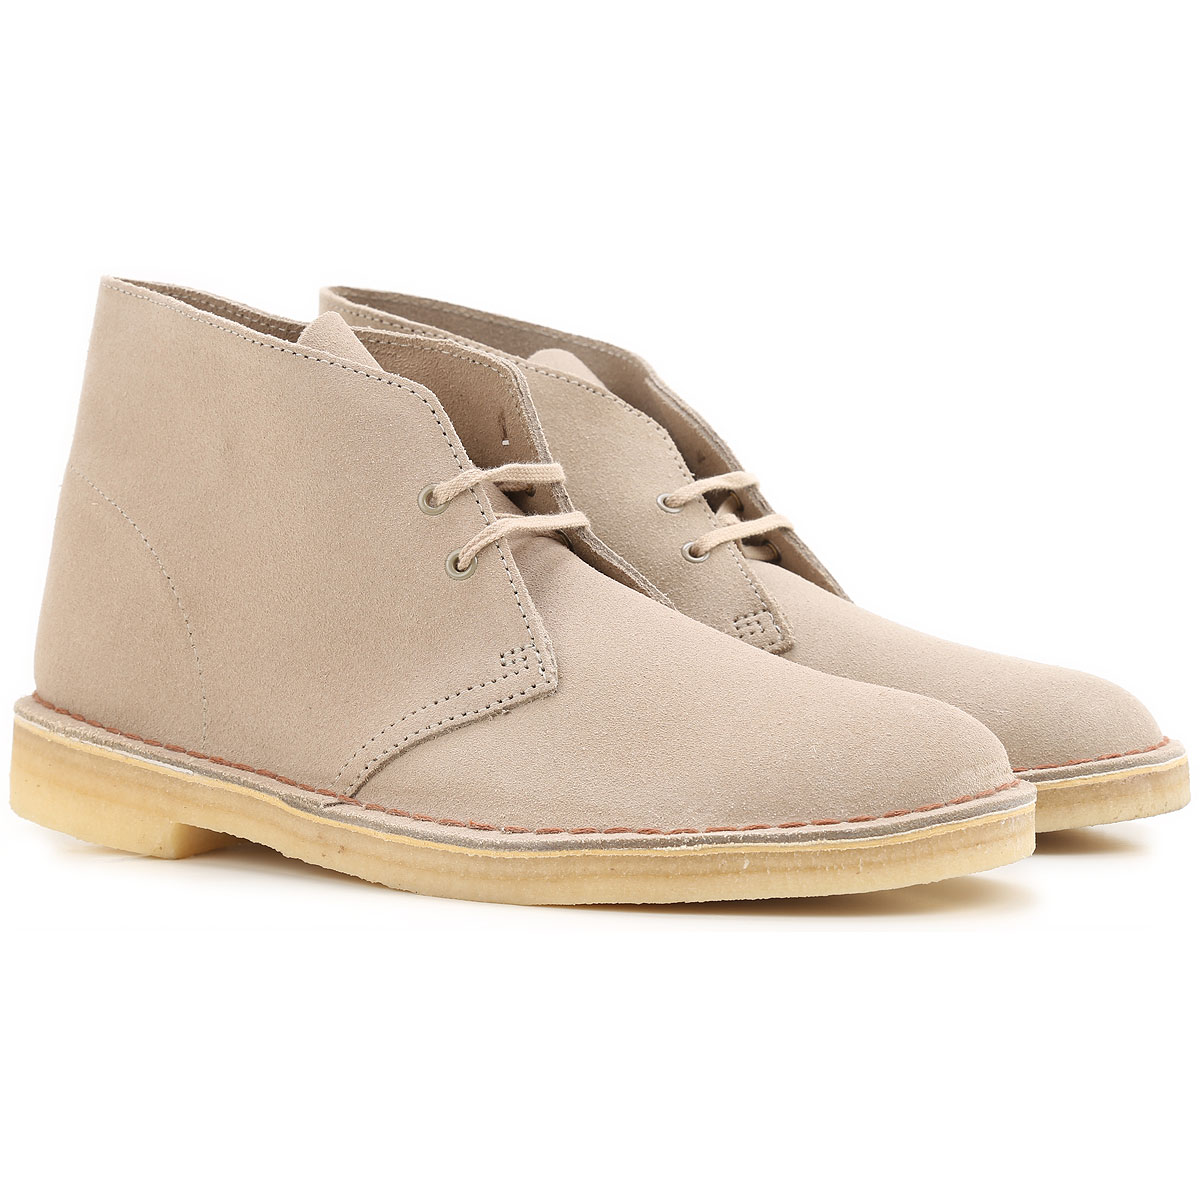 Mens Shoes Clarks, Style code: 11826-1176-sand